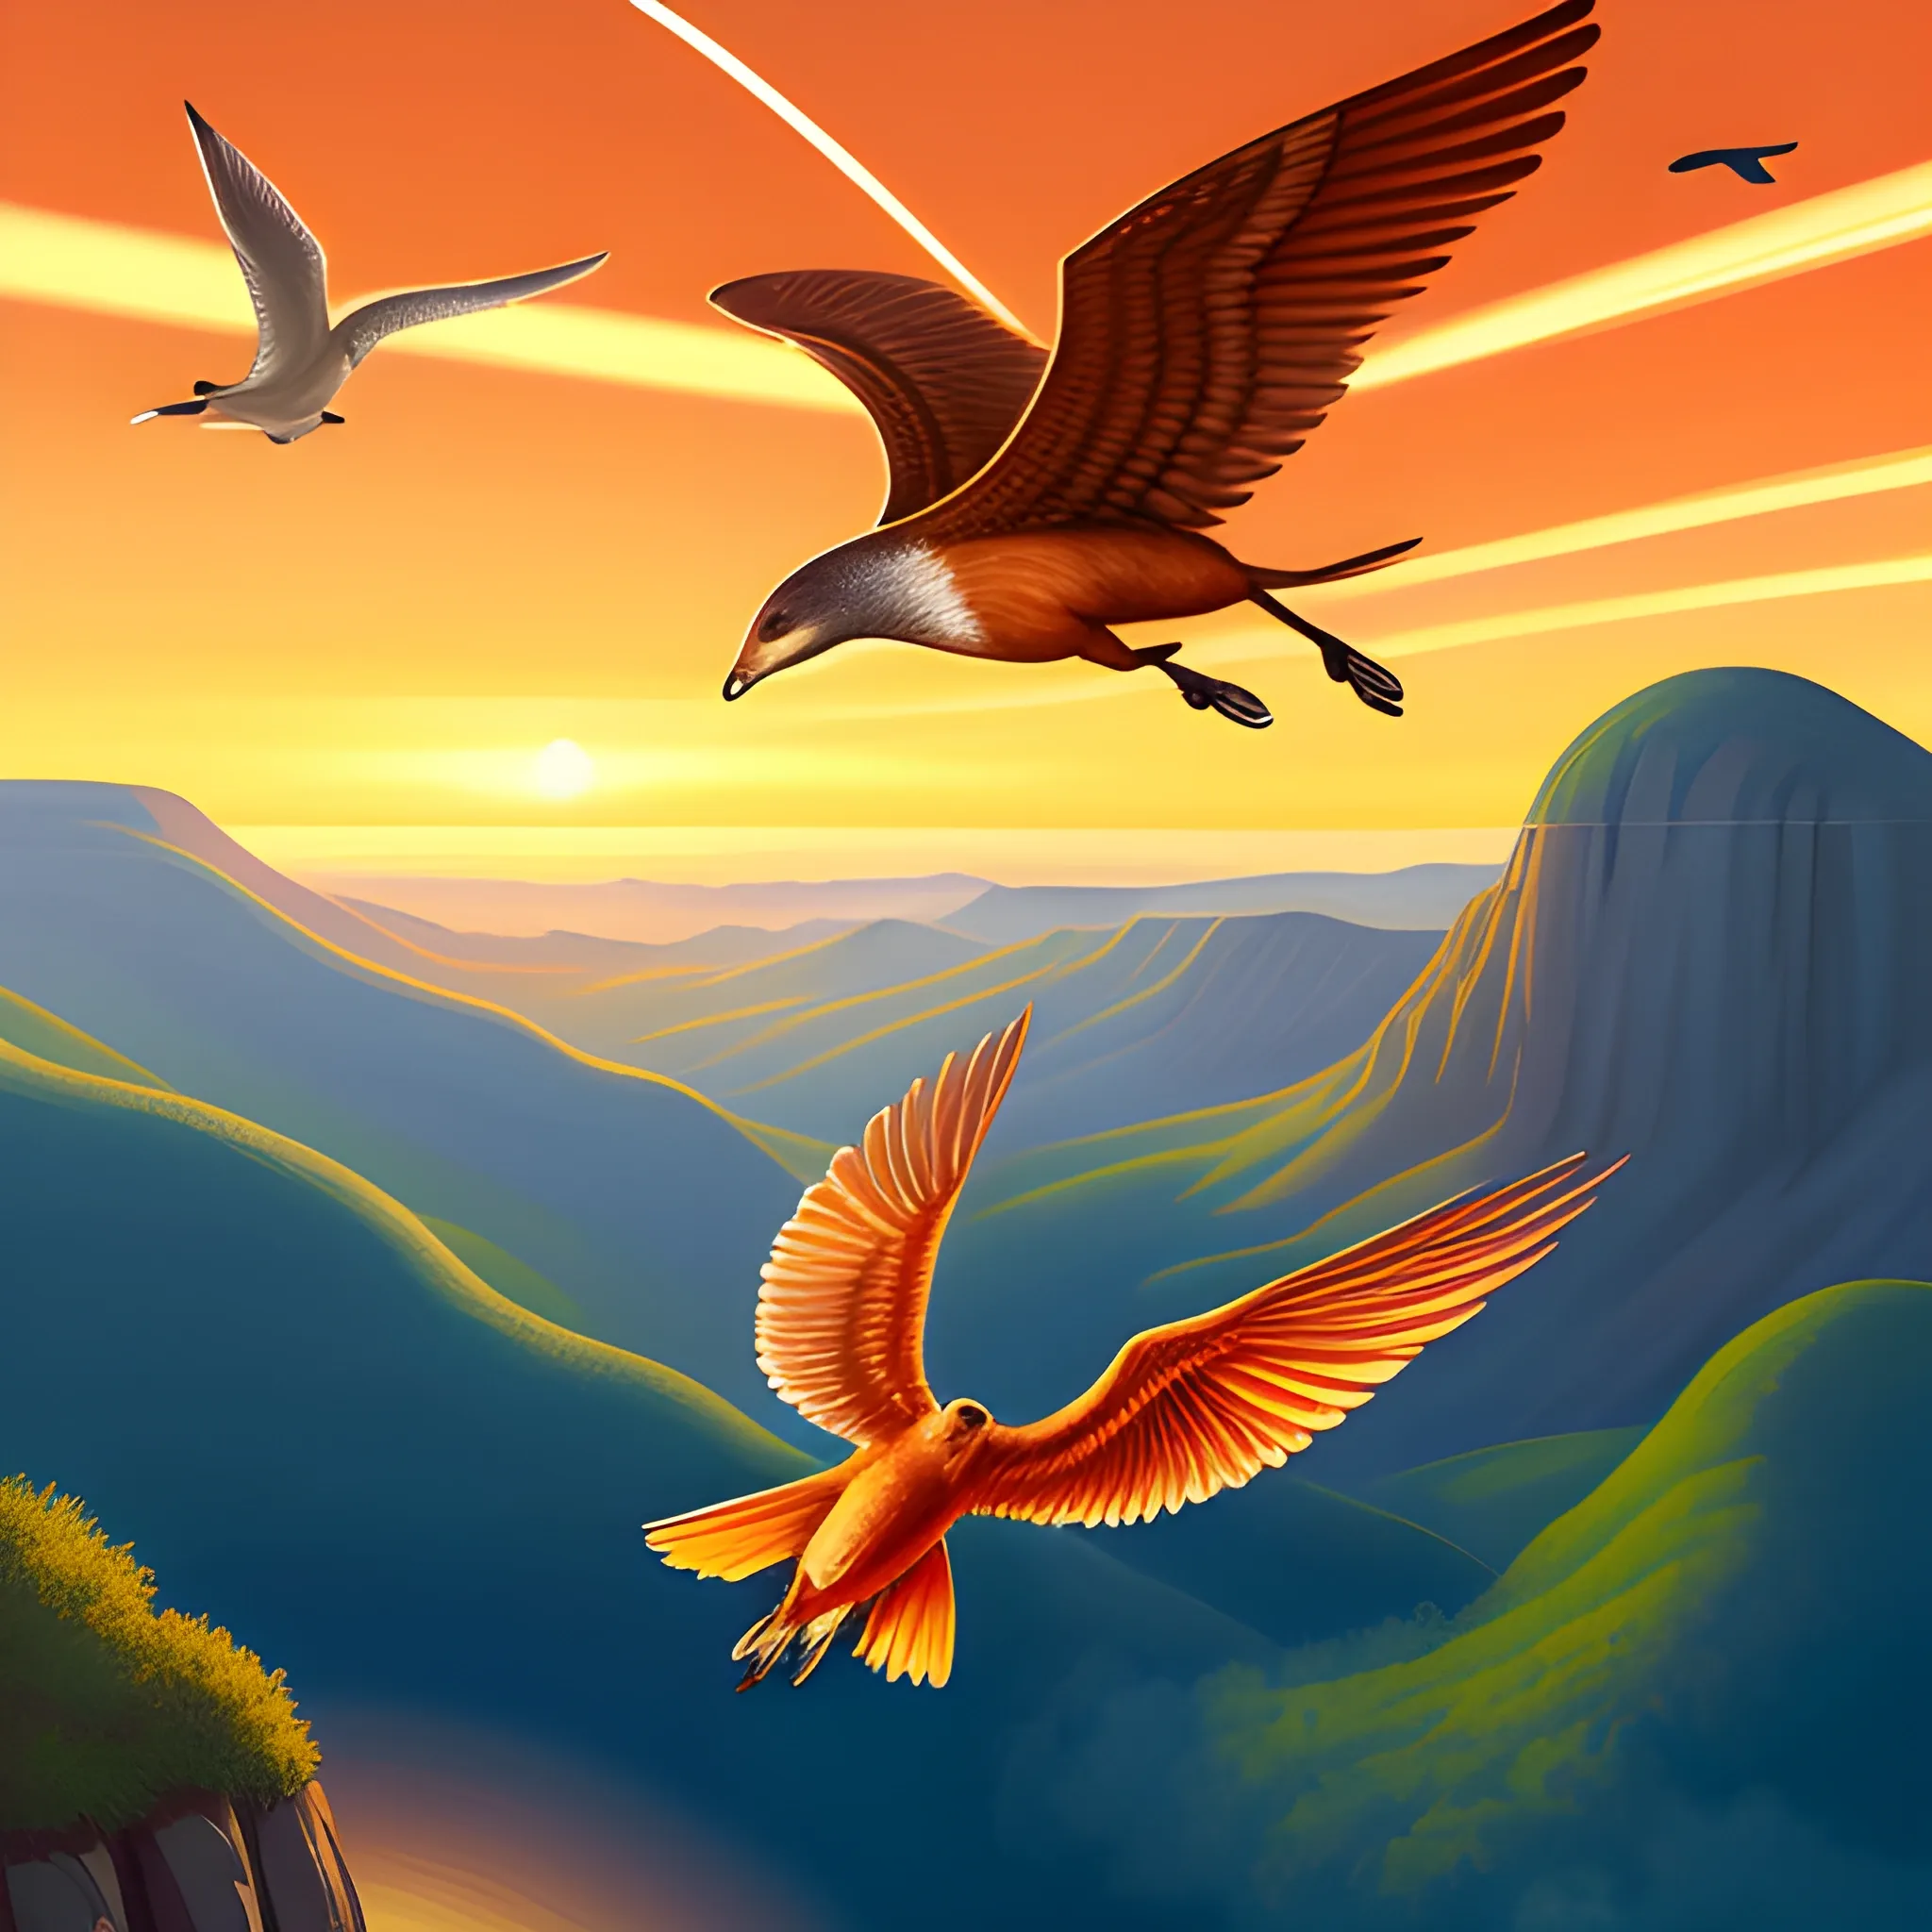 illustration of little animal flying through the skies and the landscape is observed under the daylight, with digital painting style with warm colors.